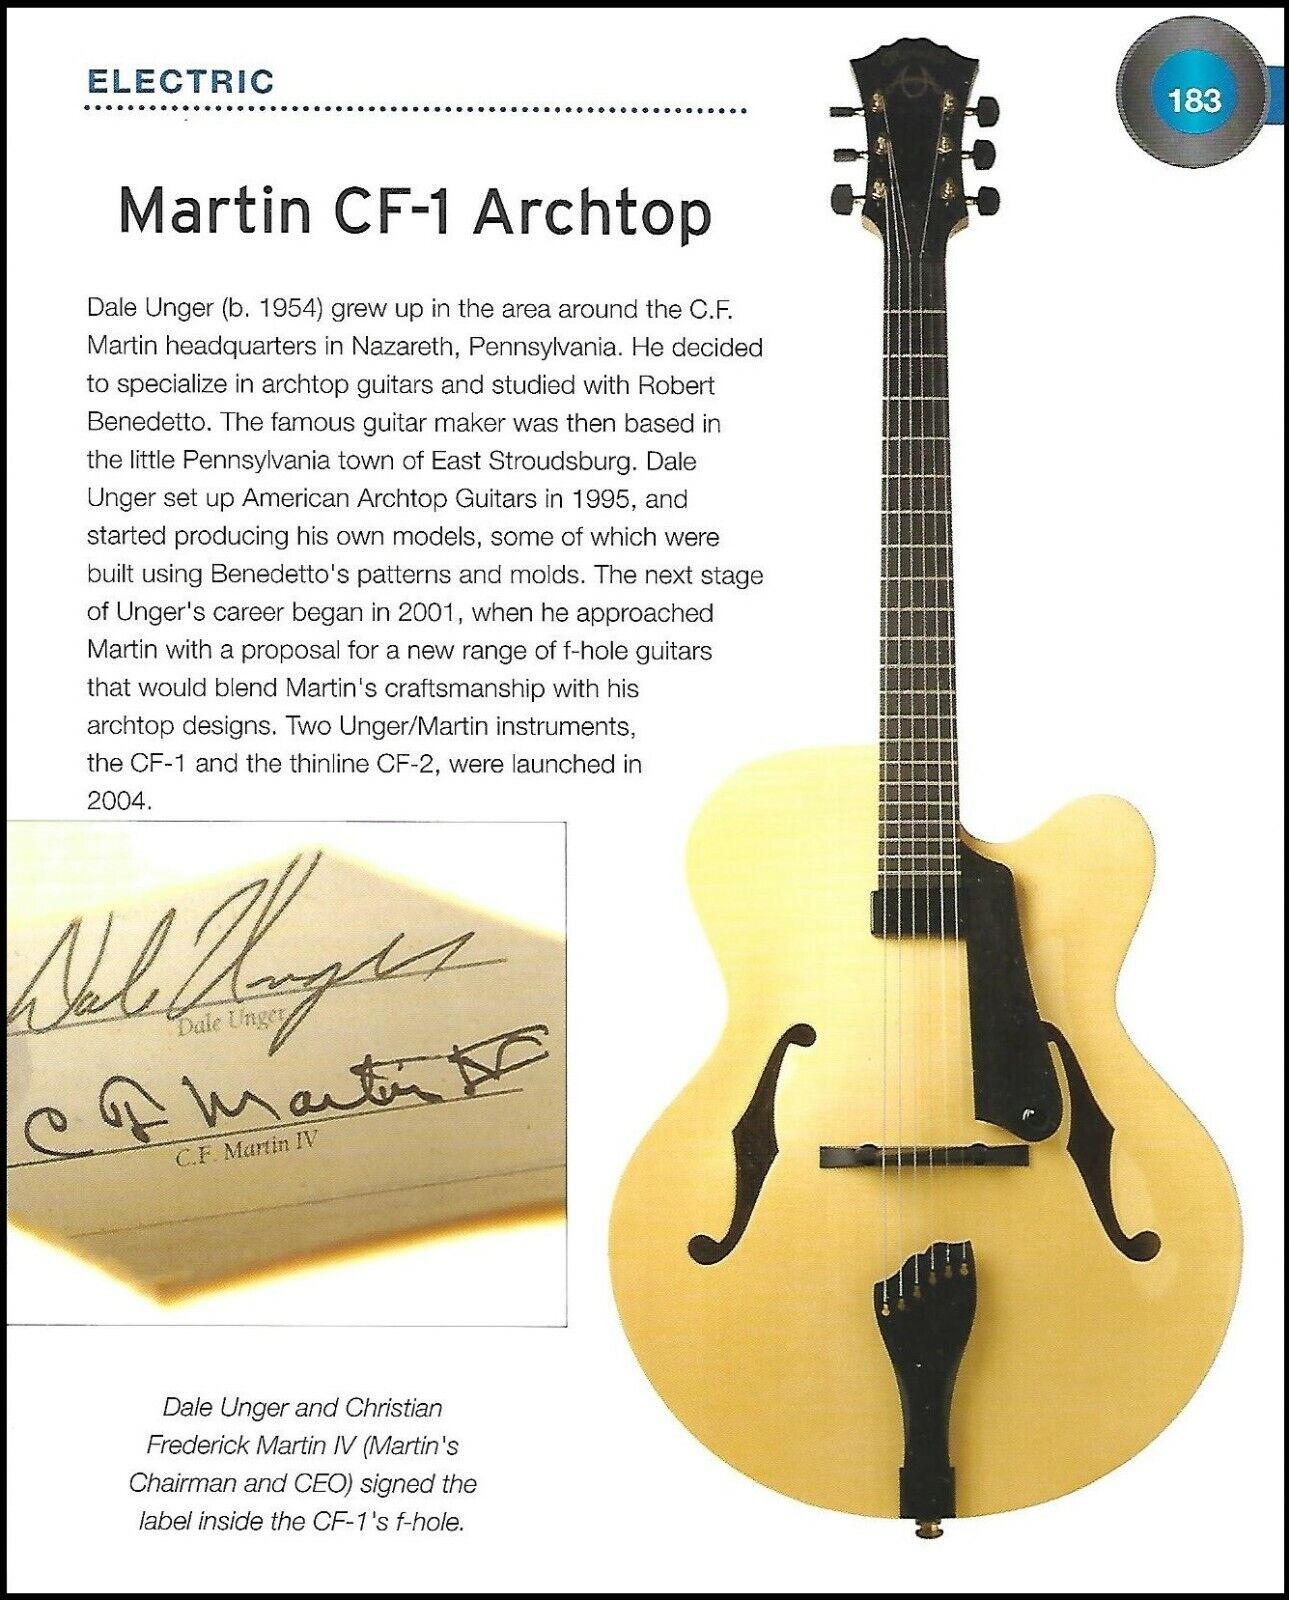 2004 Martin CF-1 Archtop electric + BC-15E acoustic bass guitar history article